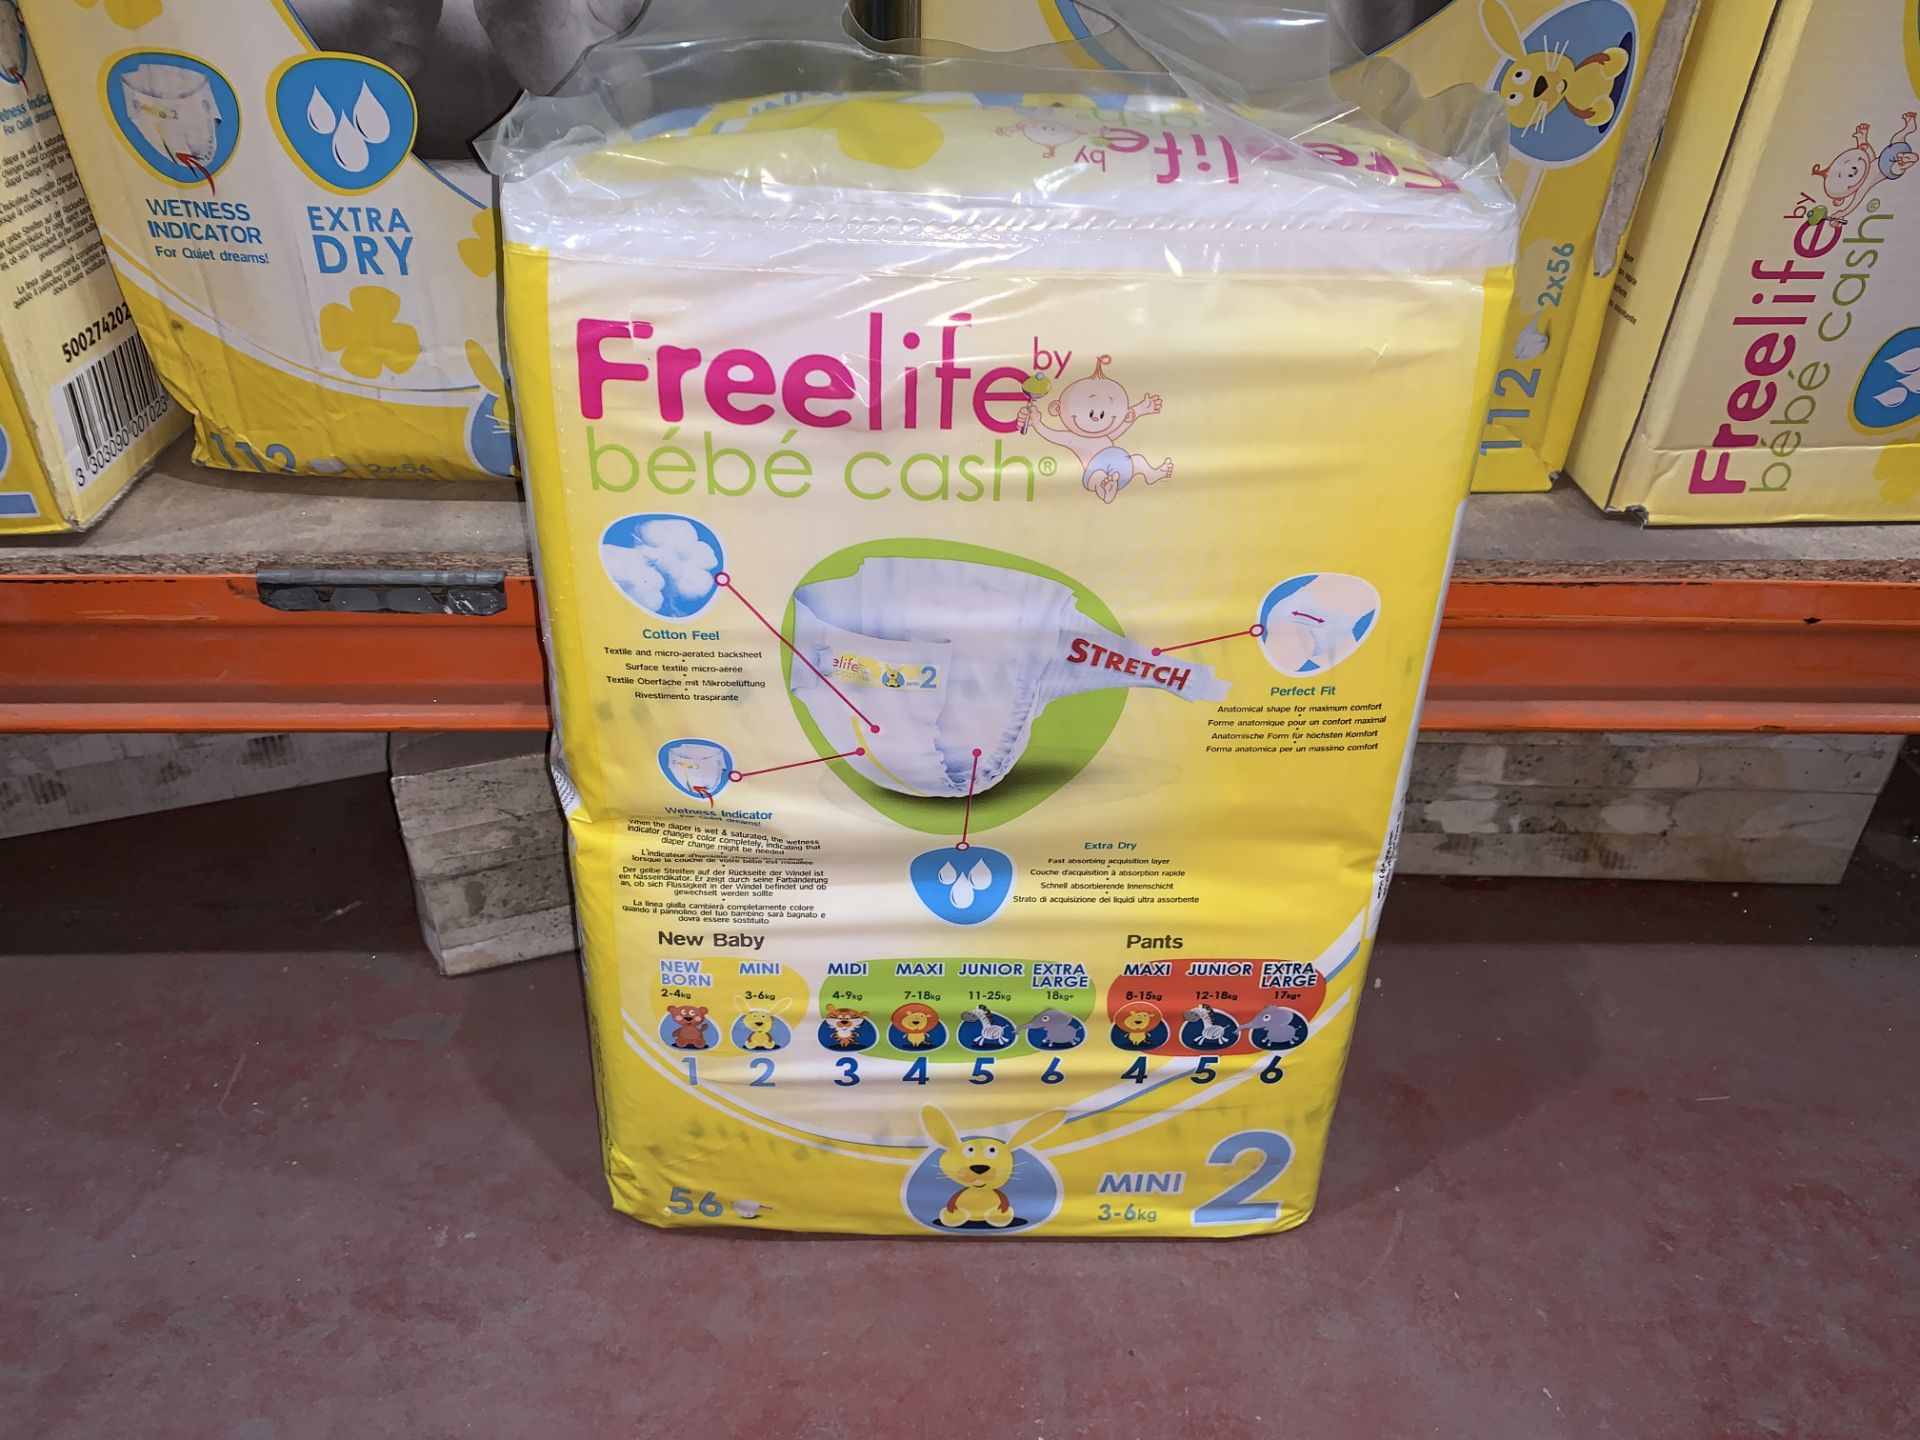 224 X FREELIFE BY BEBE CASH MINI 2 NAPPIES IN 2 BOXES